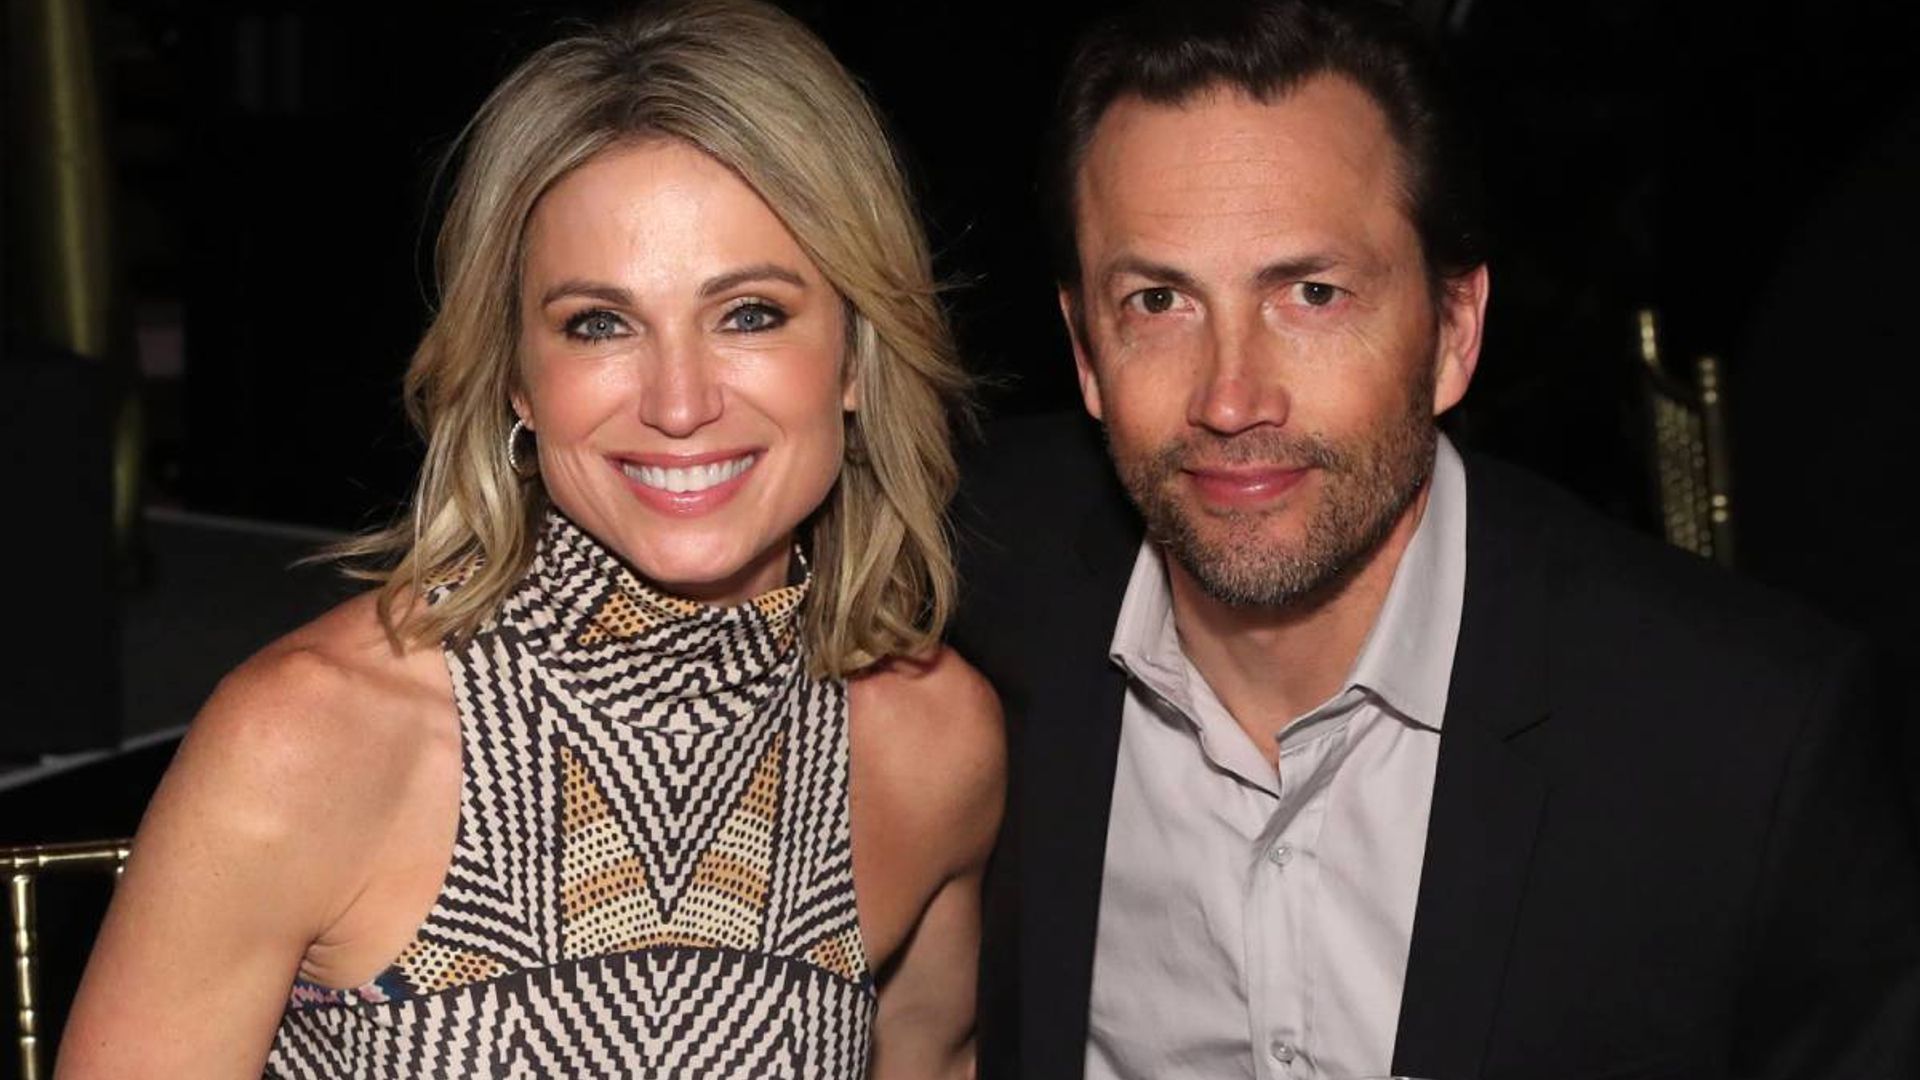 Amy Robach reflects on major family change with husband Andrew Shue